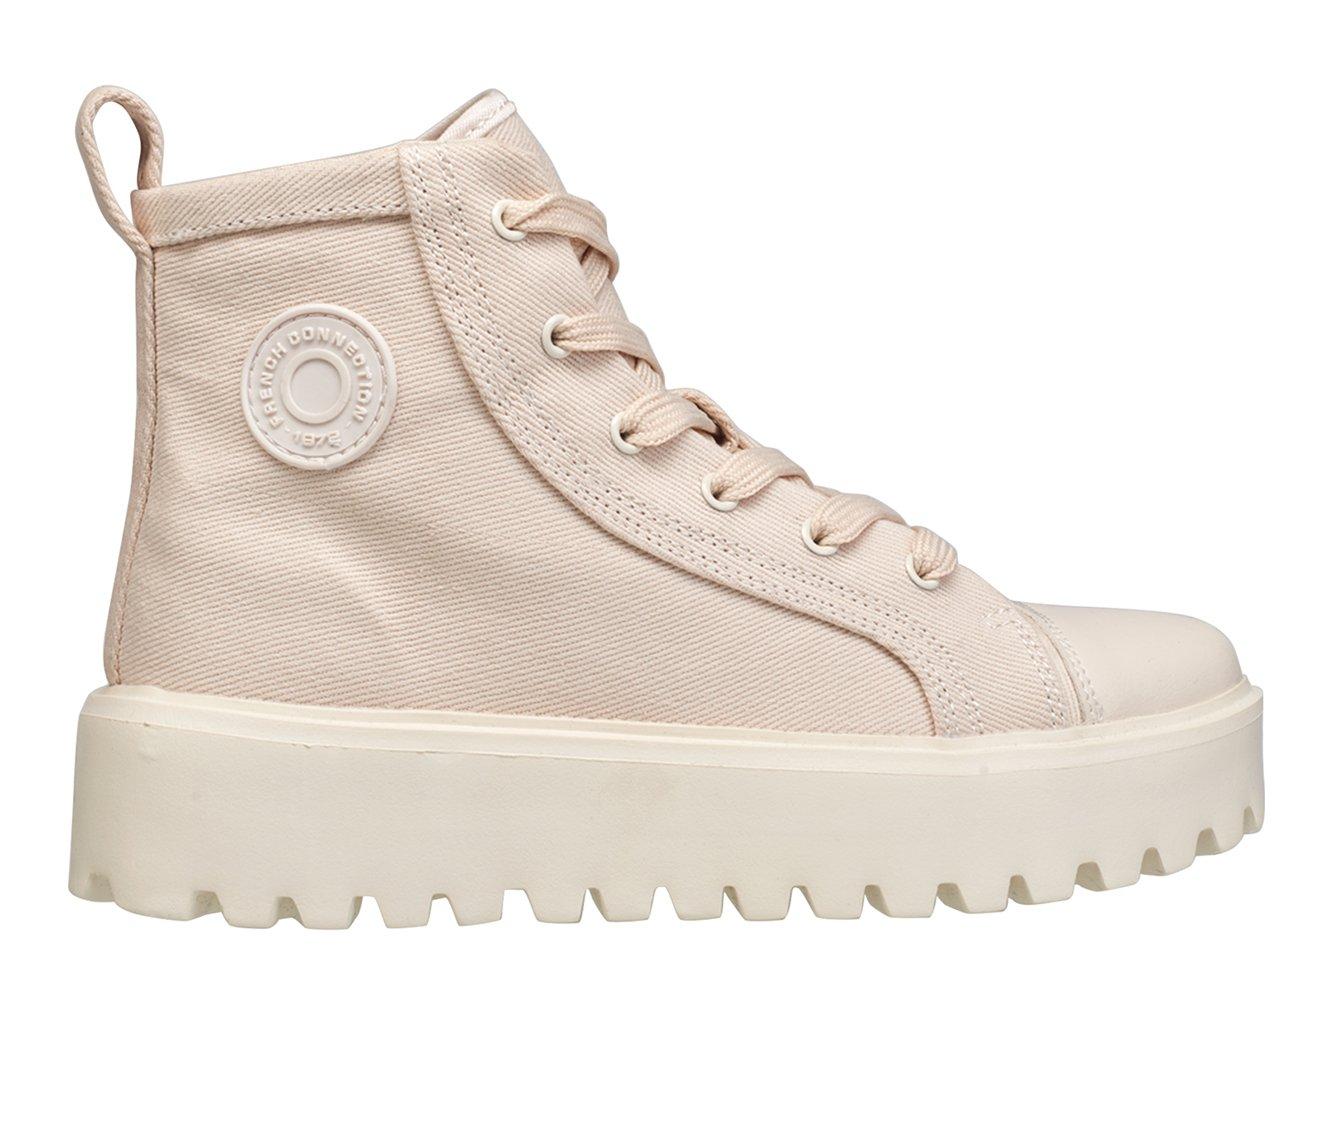 Women's French Connection Angel Platform Sneakers